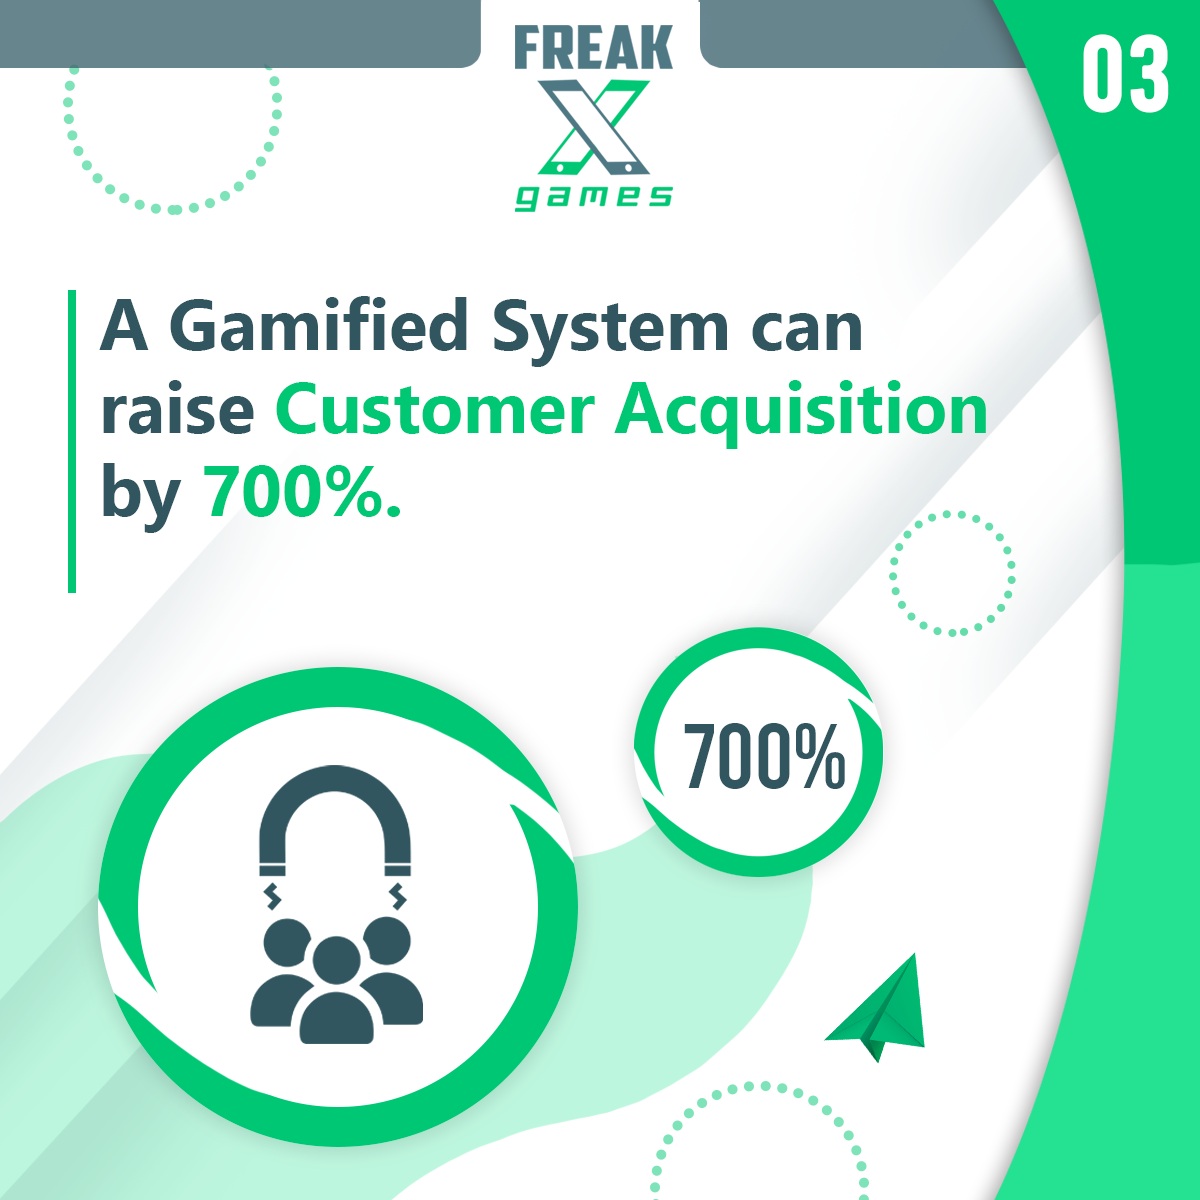 Gamification of business increases customer acquisition by 700%